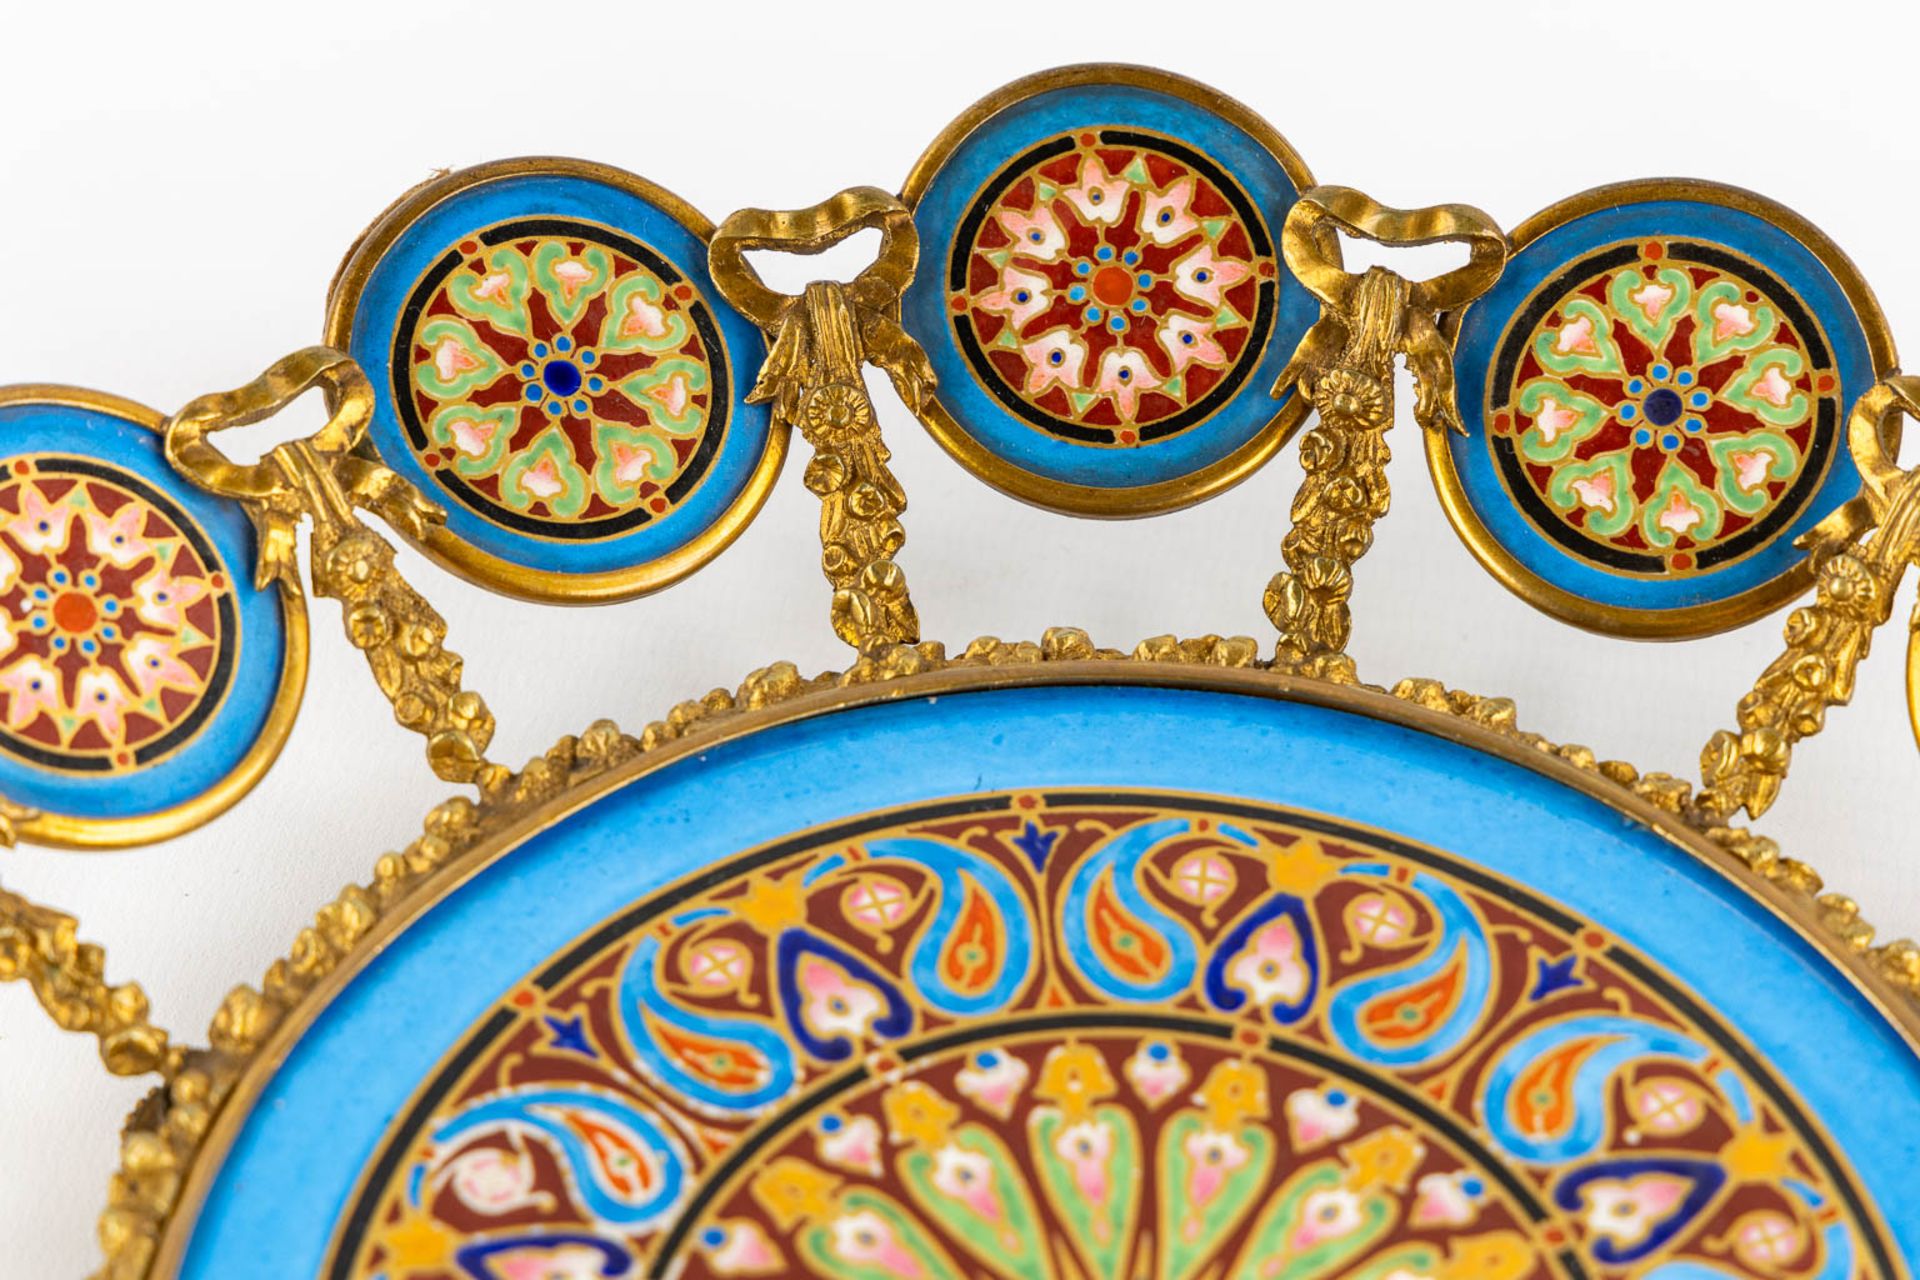 A highly decorative serving plate, gilt bronze mounted with hand-painted porcelain plaques, 19th C. - Image 3 of 8